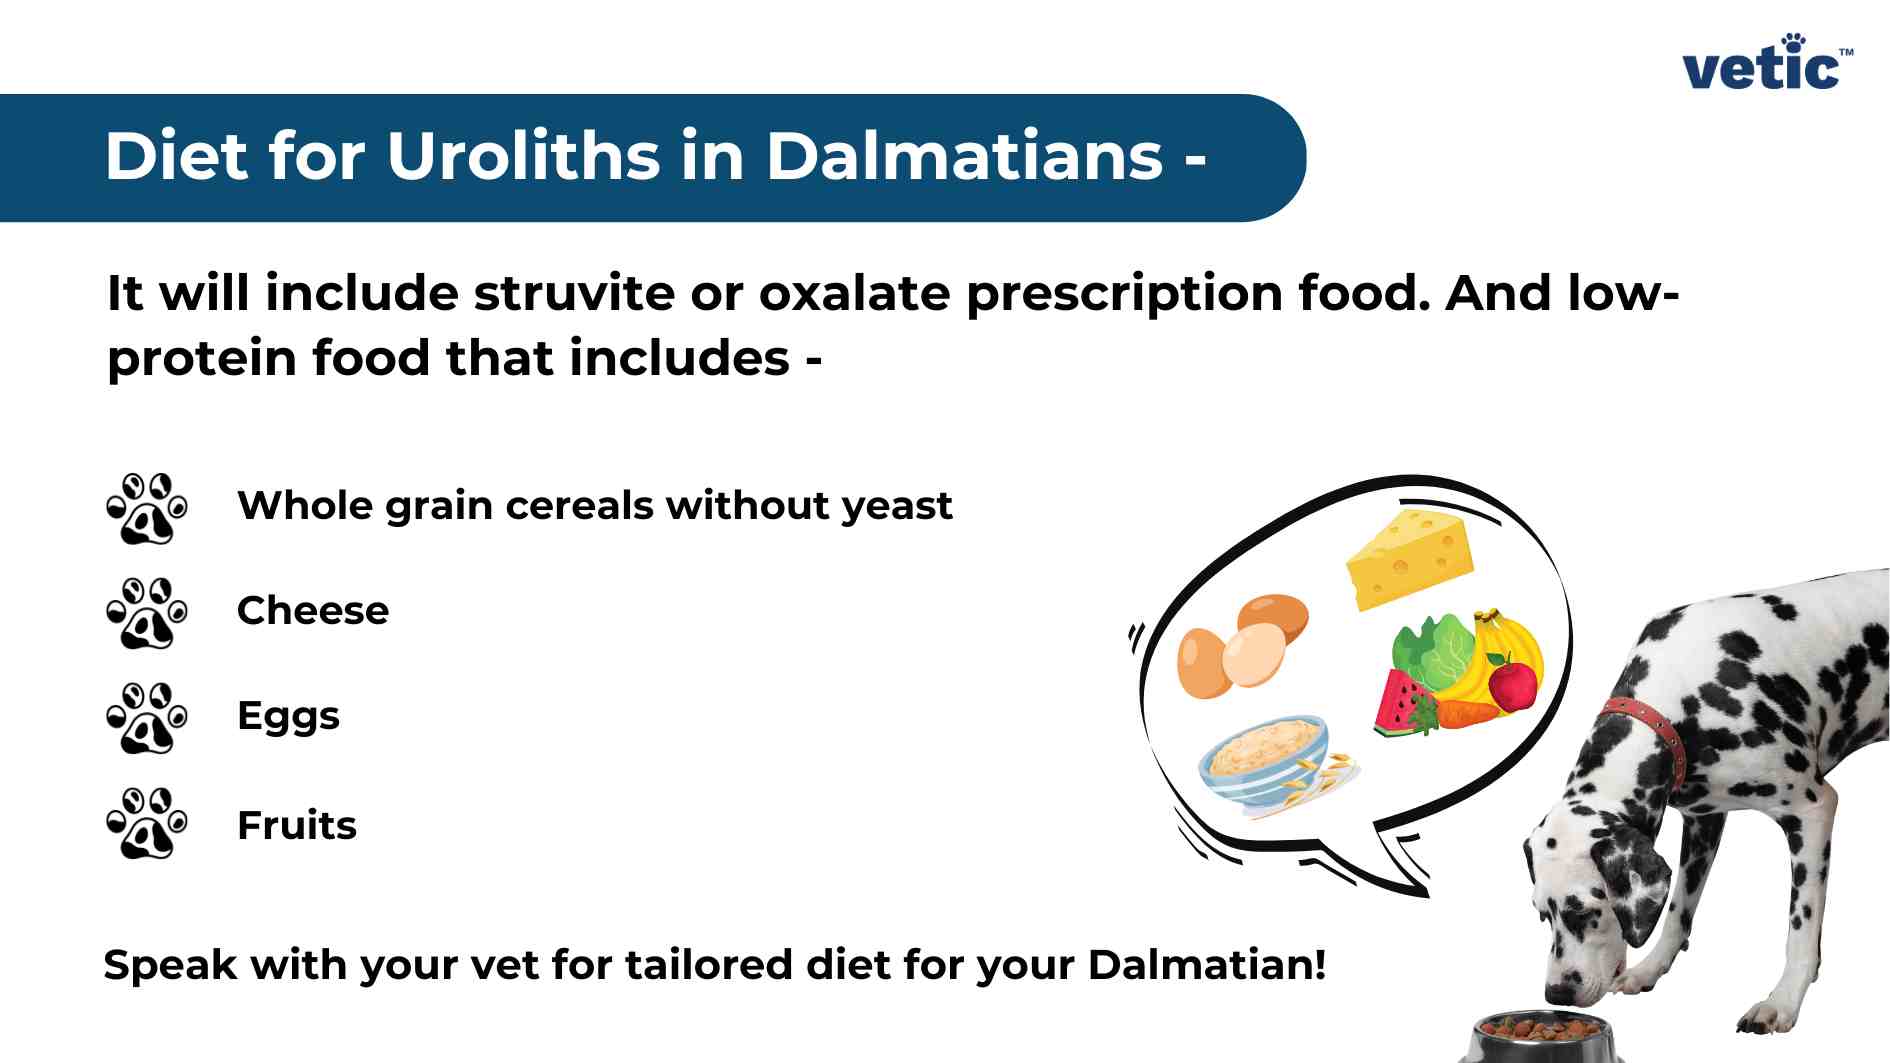 The image is an informational graphic titled “Diet for Uroliths in Dalmatians - vetic”. The background is white with a blue header containing the title. There’s text that explains the inclusion of struvite or oxalate prescription food and low-protein food in the diet. A list follows, each item marked with a paw print icon: Whole grain cereals without yeast Cheese Eggs Fruits On the right side, there’s an image of a Dalmatian dog looking at a speech bubble. Inside the speech bubble are illustrations of cheese, eggs, whole grain cereals, and fruits. At the bottom, there’s advice to speak with your vet for a tailored diet for your Dalmatian.